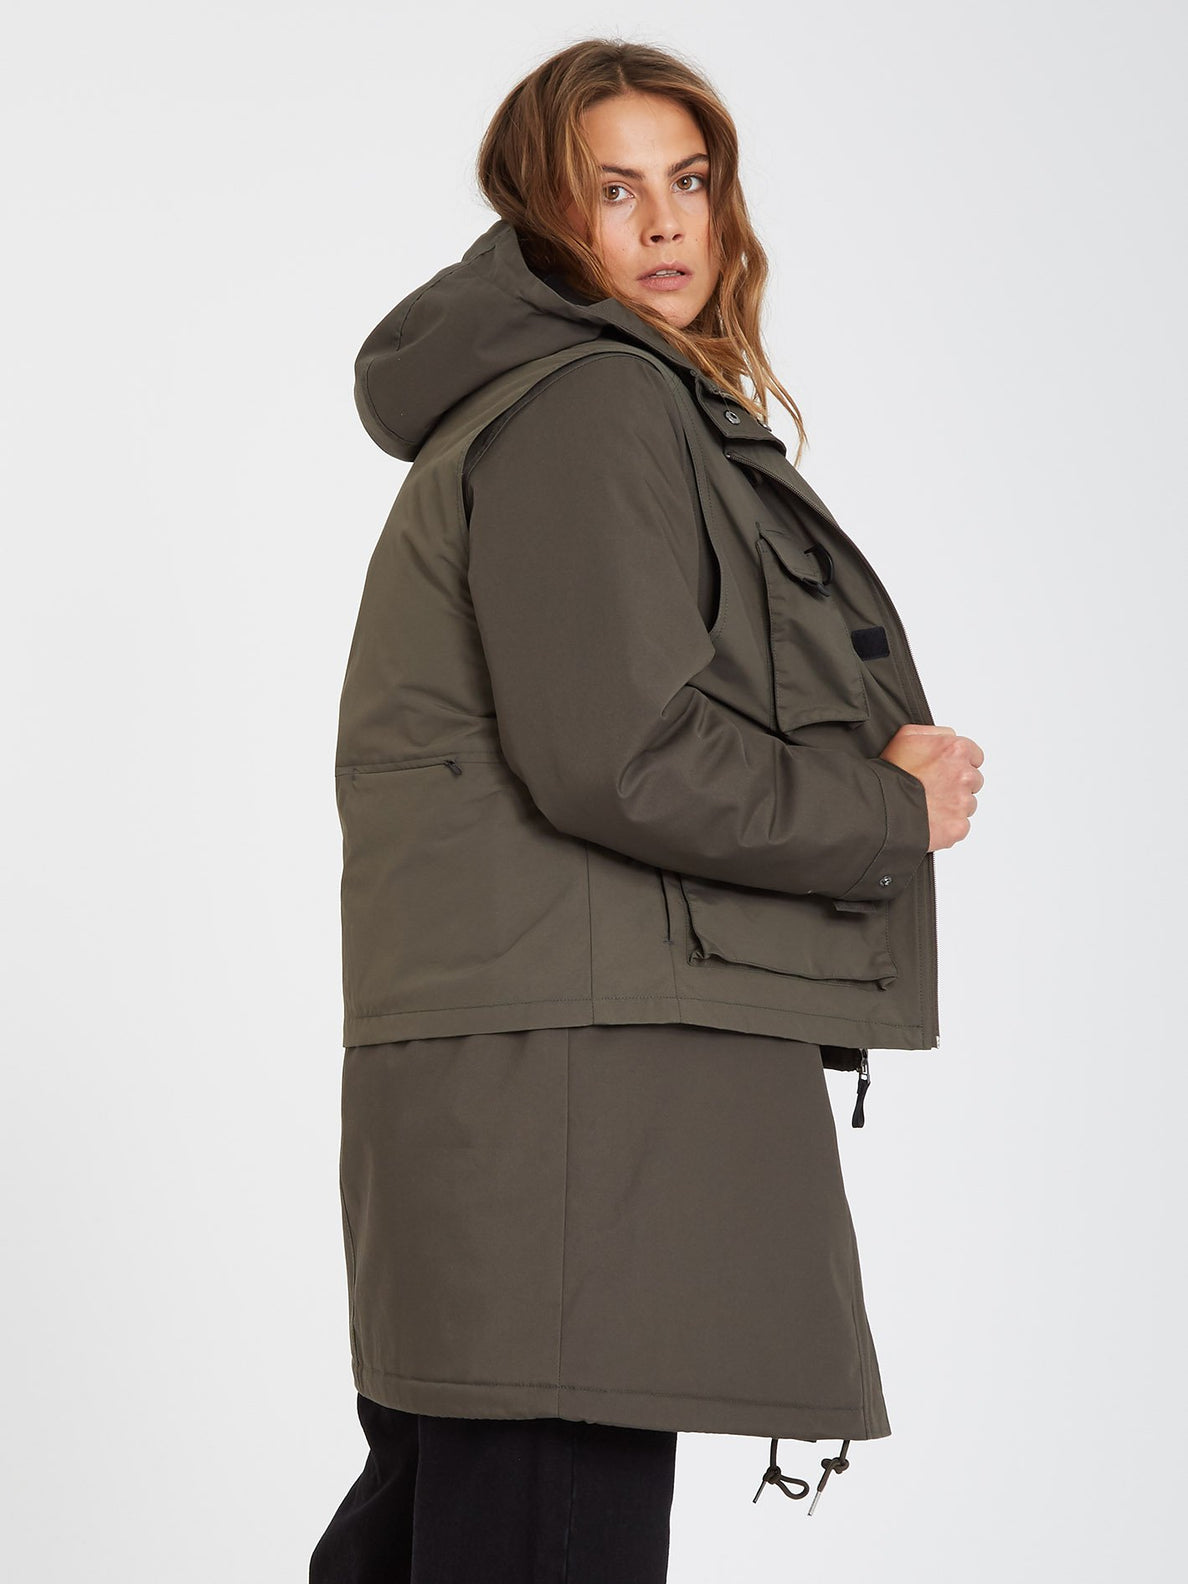 Cimandy 5K 3In1 Parka - ARMY GREEN COMBO (B1732105_ARC) [2]